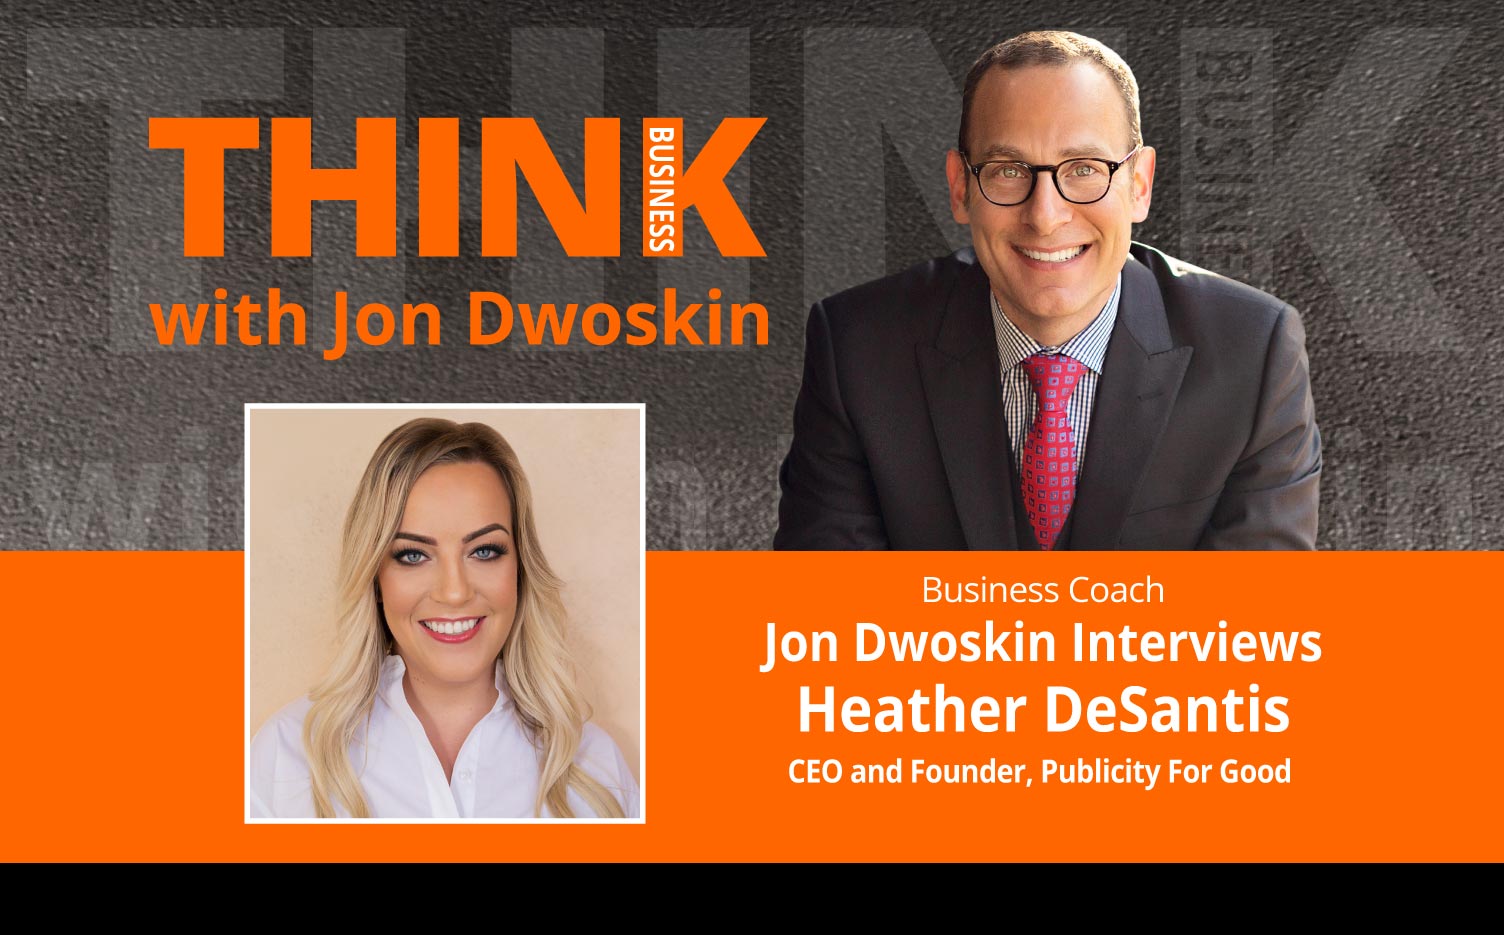 Jon Dwoskin Interviews Heather DeSantis, CEO and Founder, Publicity For Good 